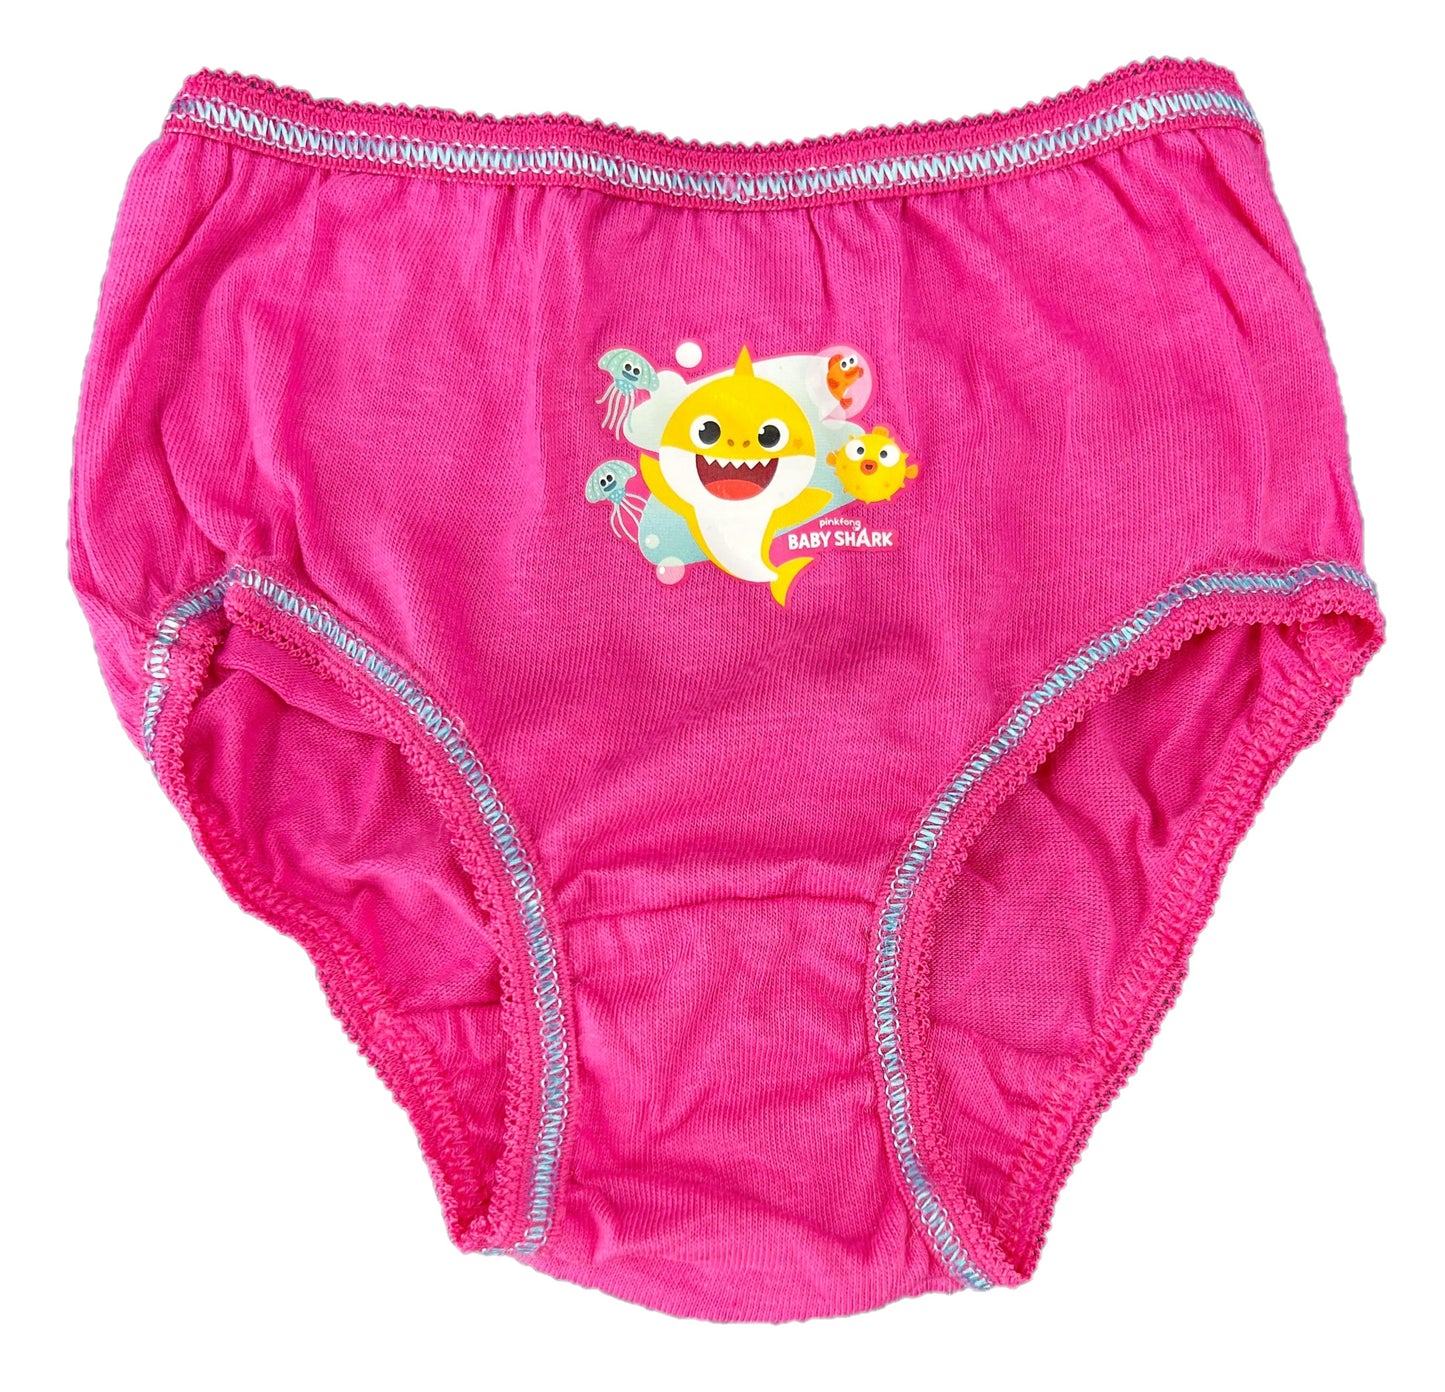 Girls Baby Shark Knickers "Smile" 5pk  1-5 Years Available